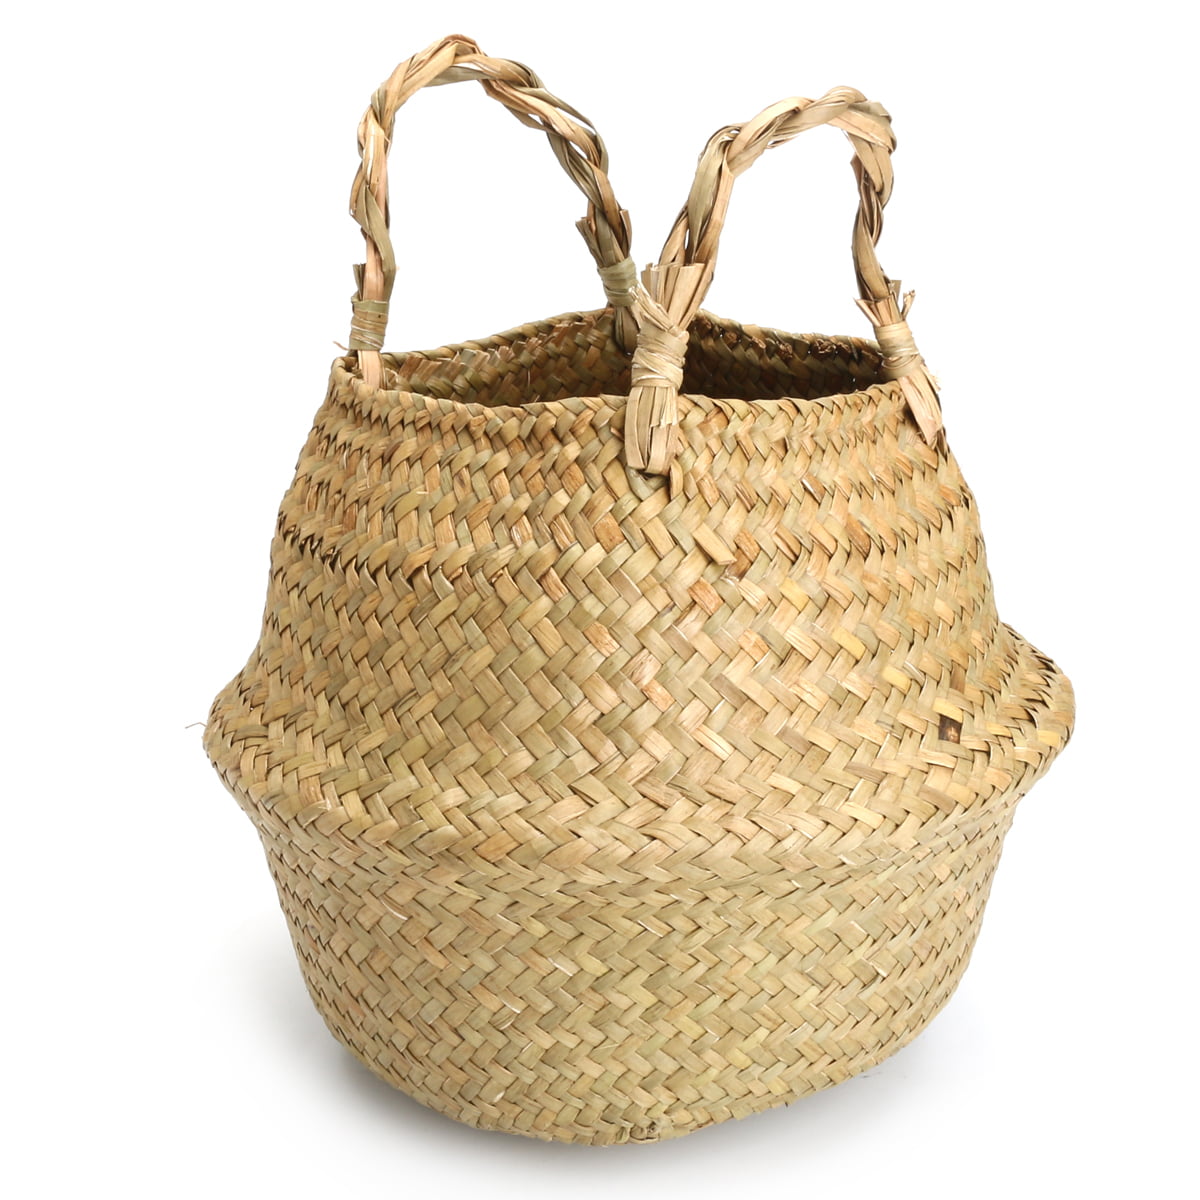 DOKOT Seagrass Belly Basket Natural Woven Plant Pot Foldable with Handles for Storage Laundry Blankets Toys 36 x 32 cm, Natural + Black 